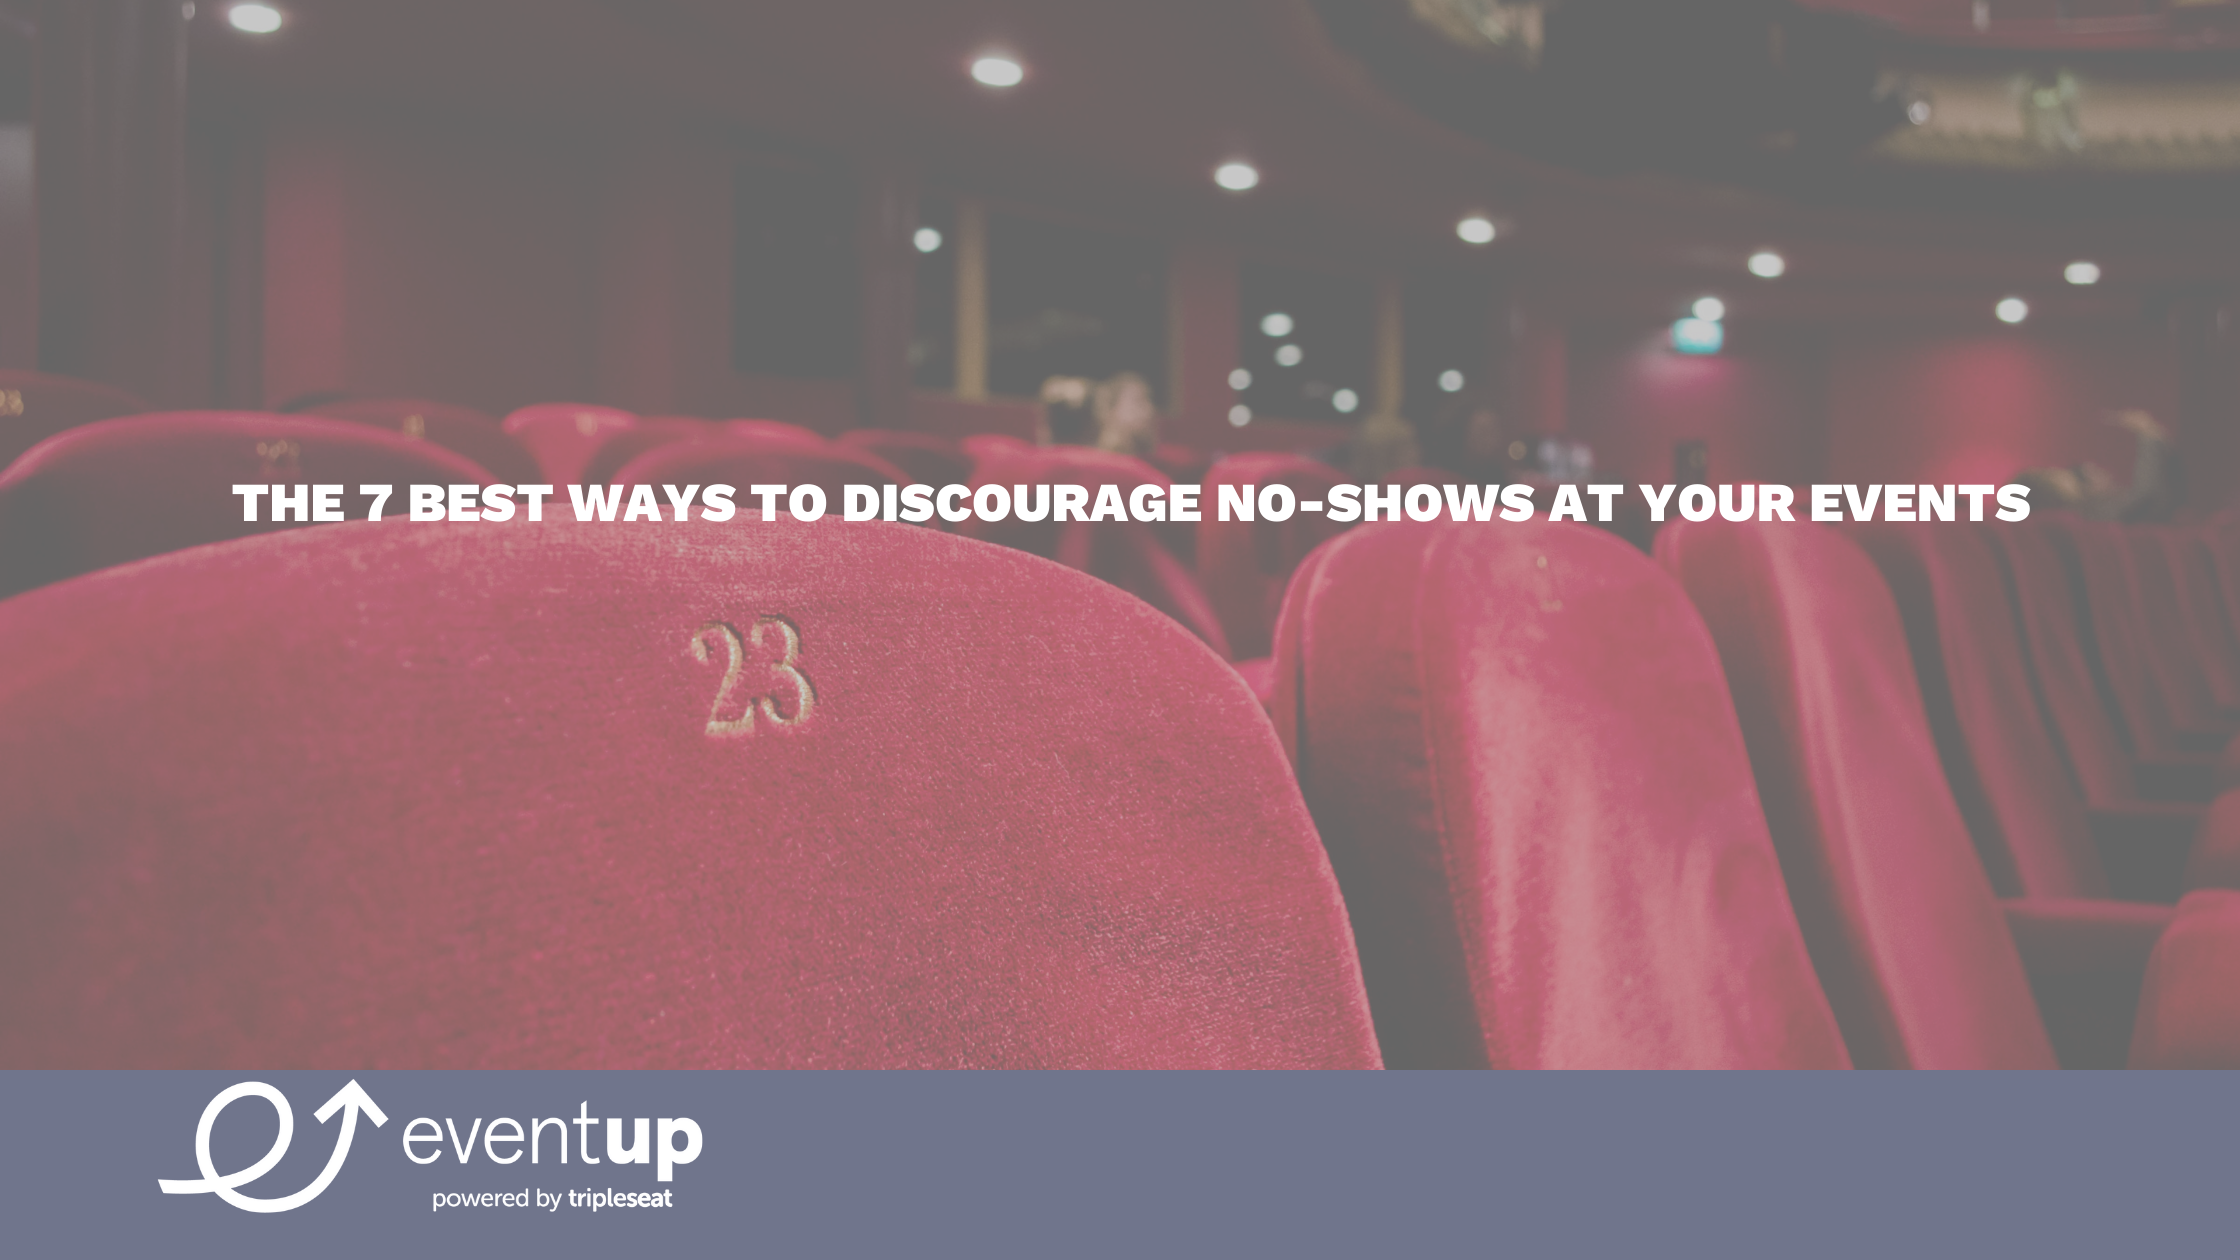 The 7 Best Ways To Discourage No-Shows at Your Events